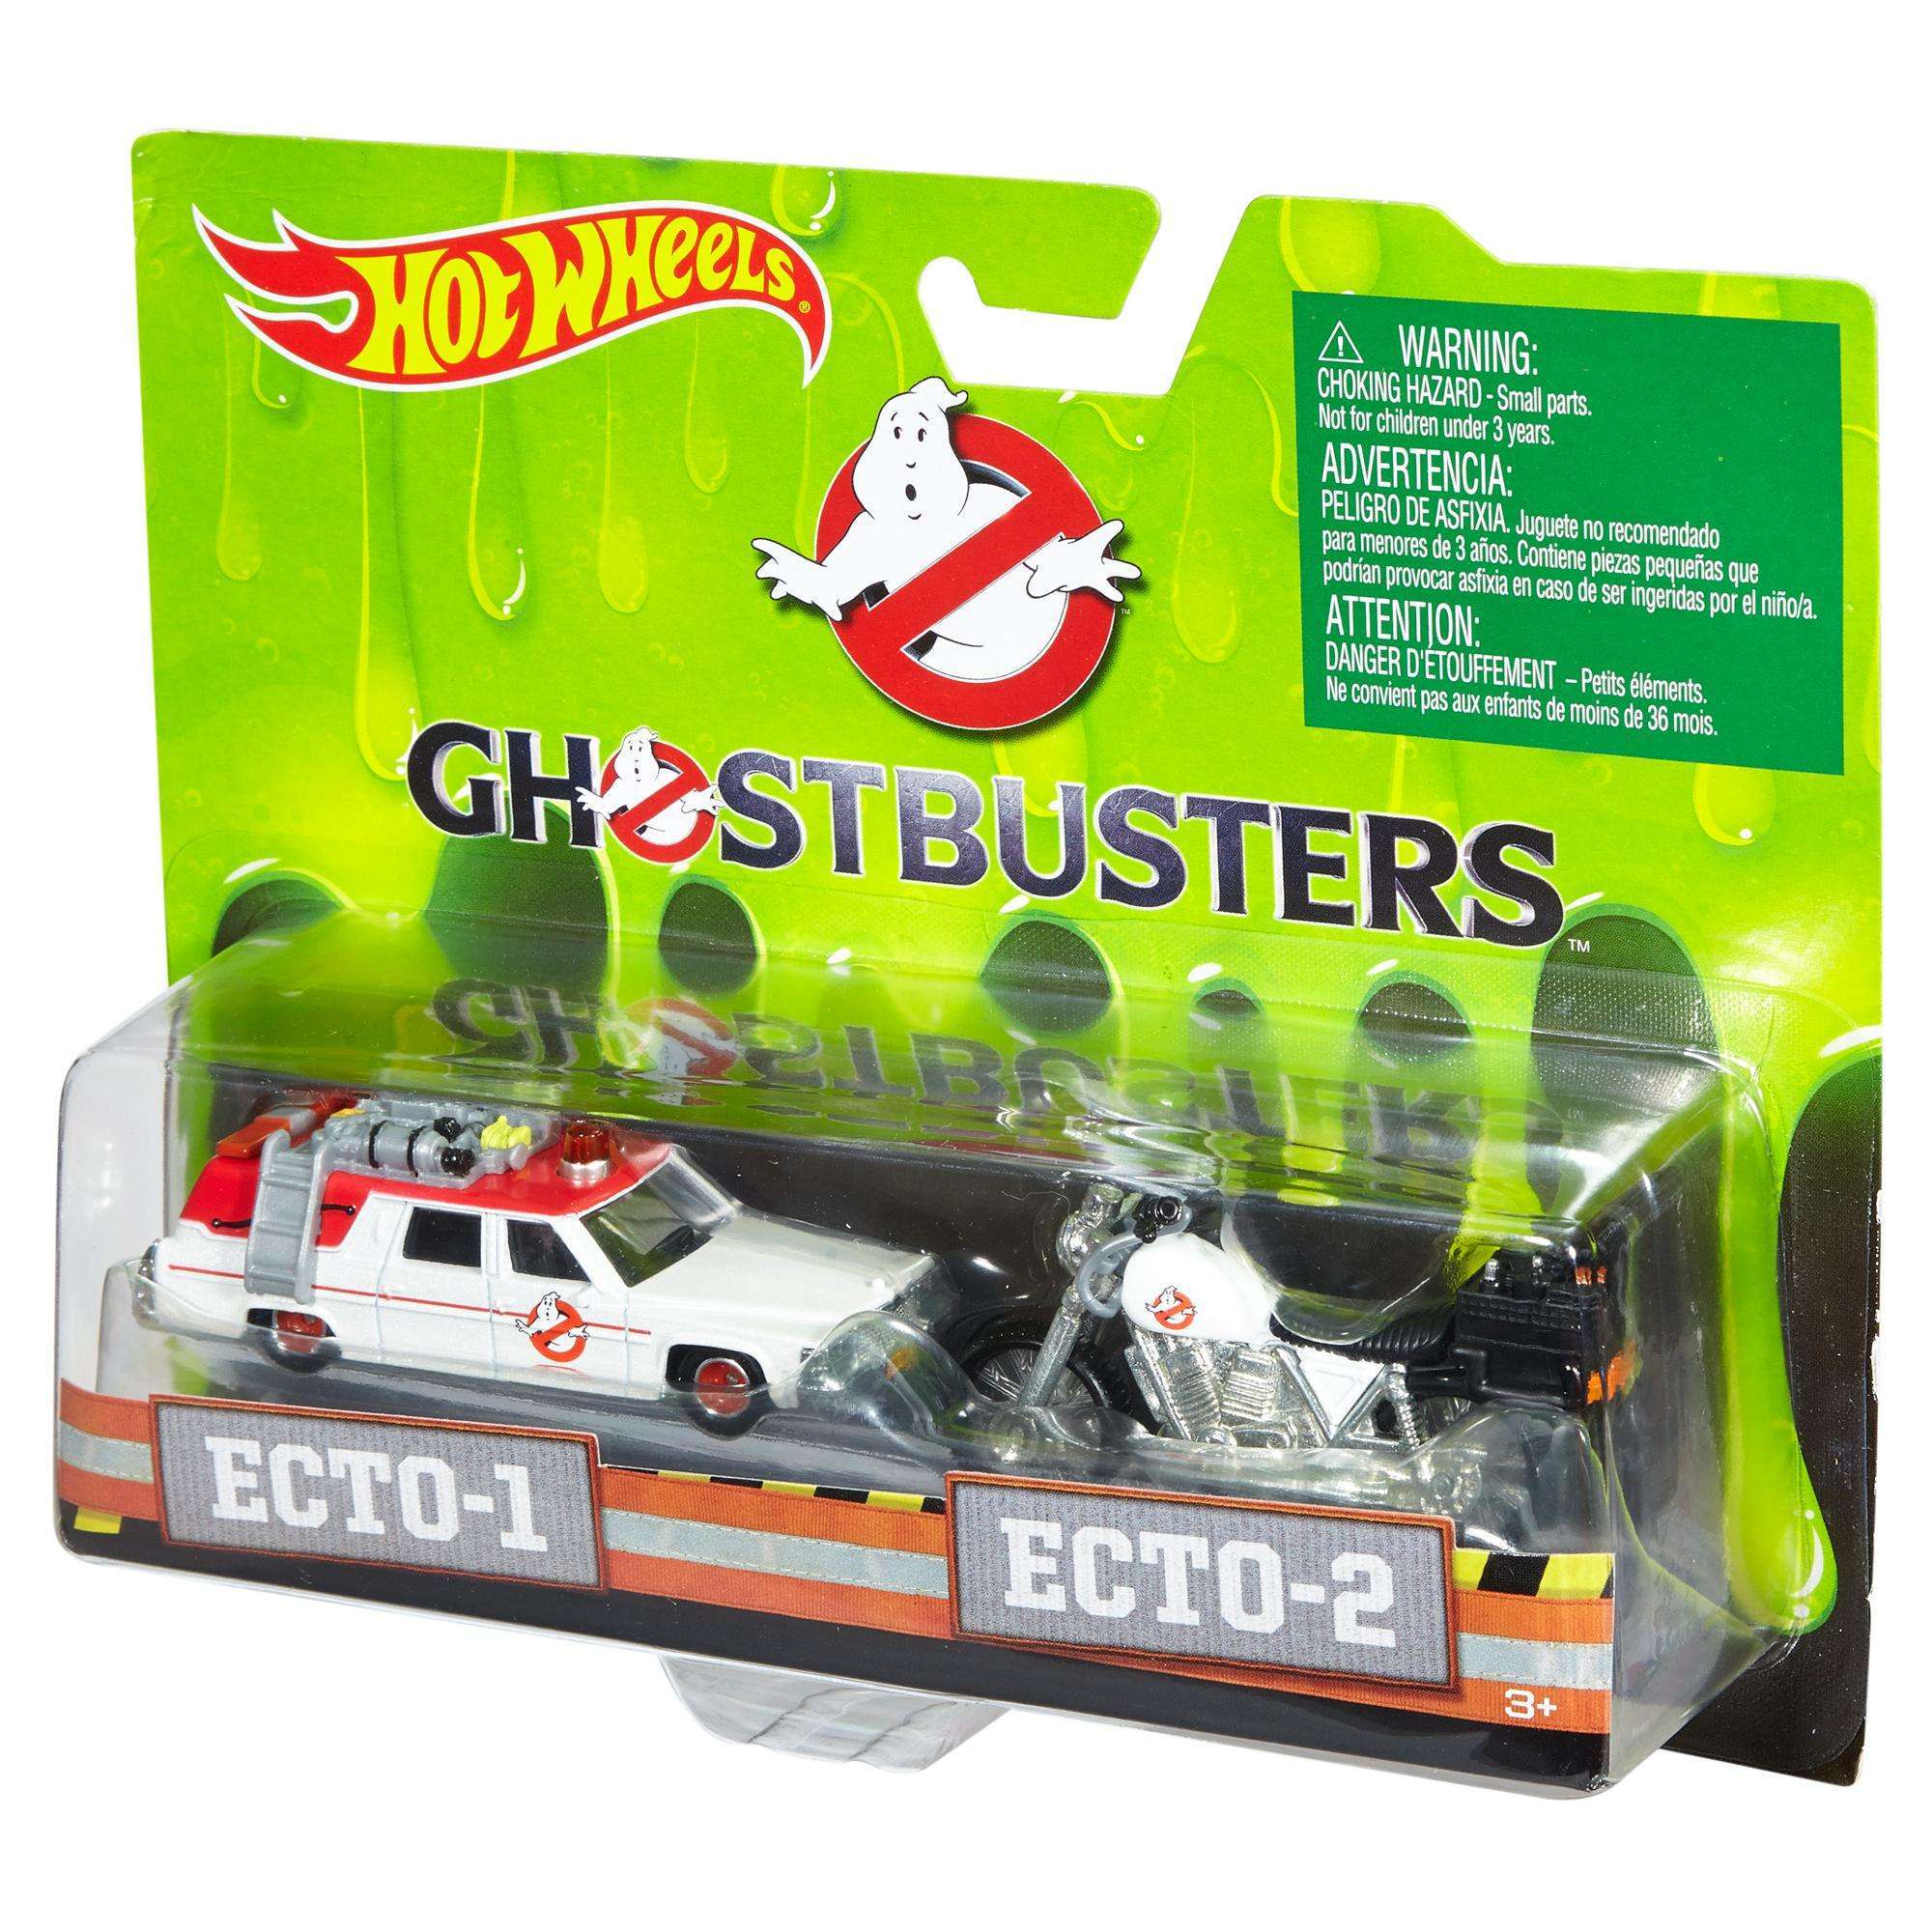 Ghostbusters ECTO-1 and ECTO-2 Vehicles - image 2 of 3